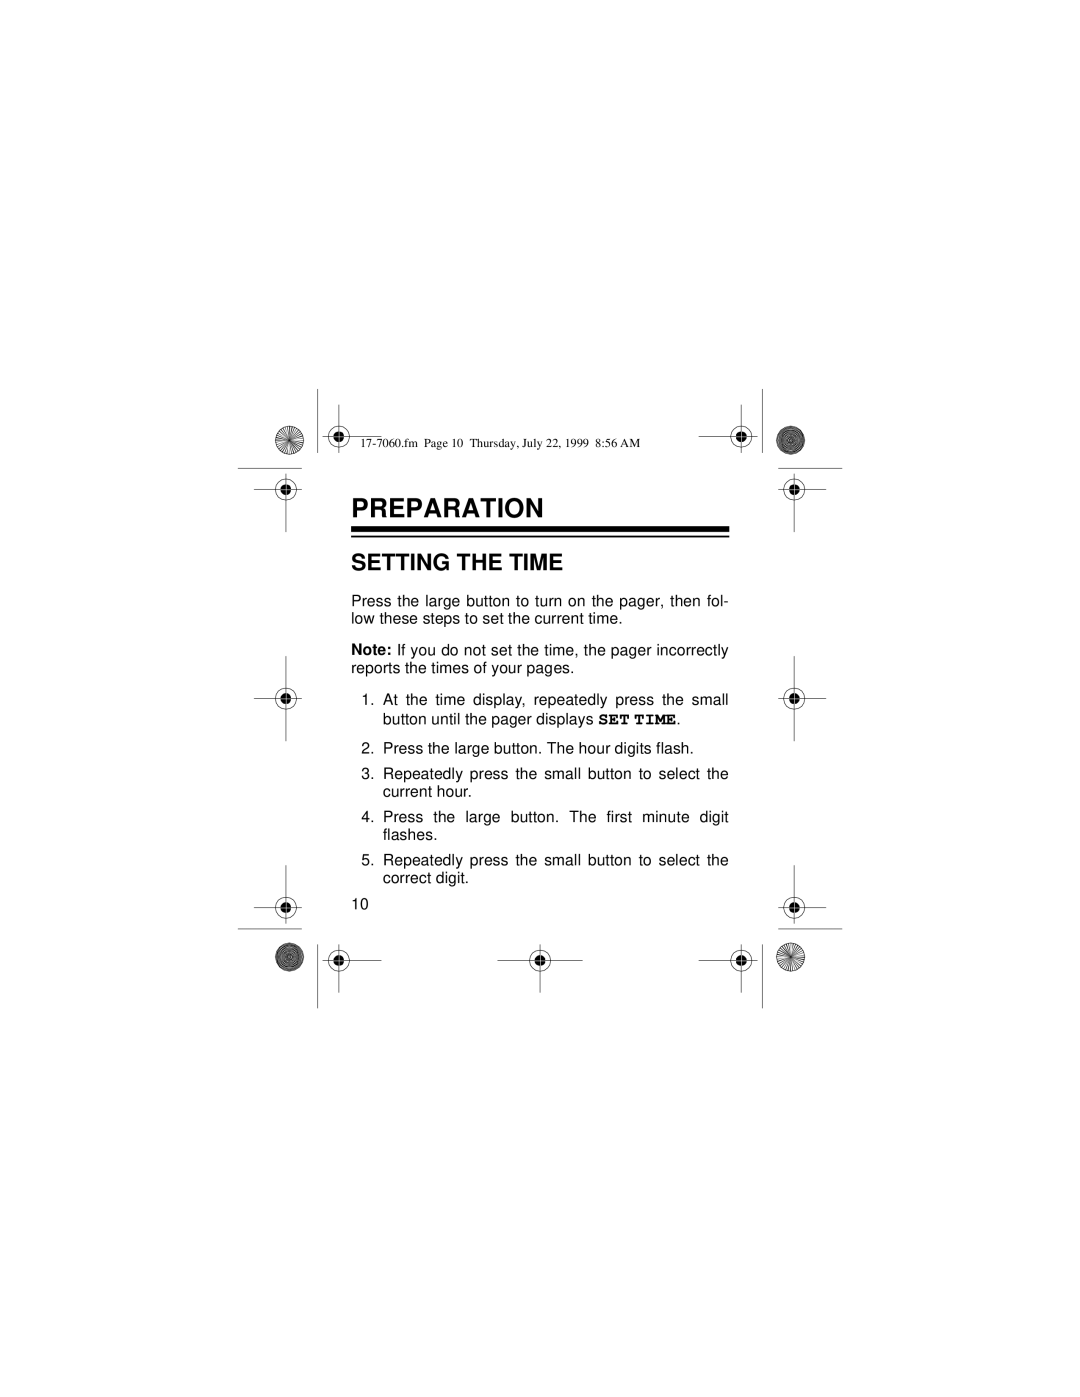 Radio Shack 17-7040, 17-7060 owner manual Preparation, Setting The Time 